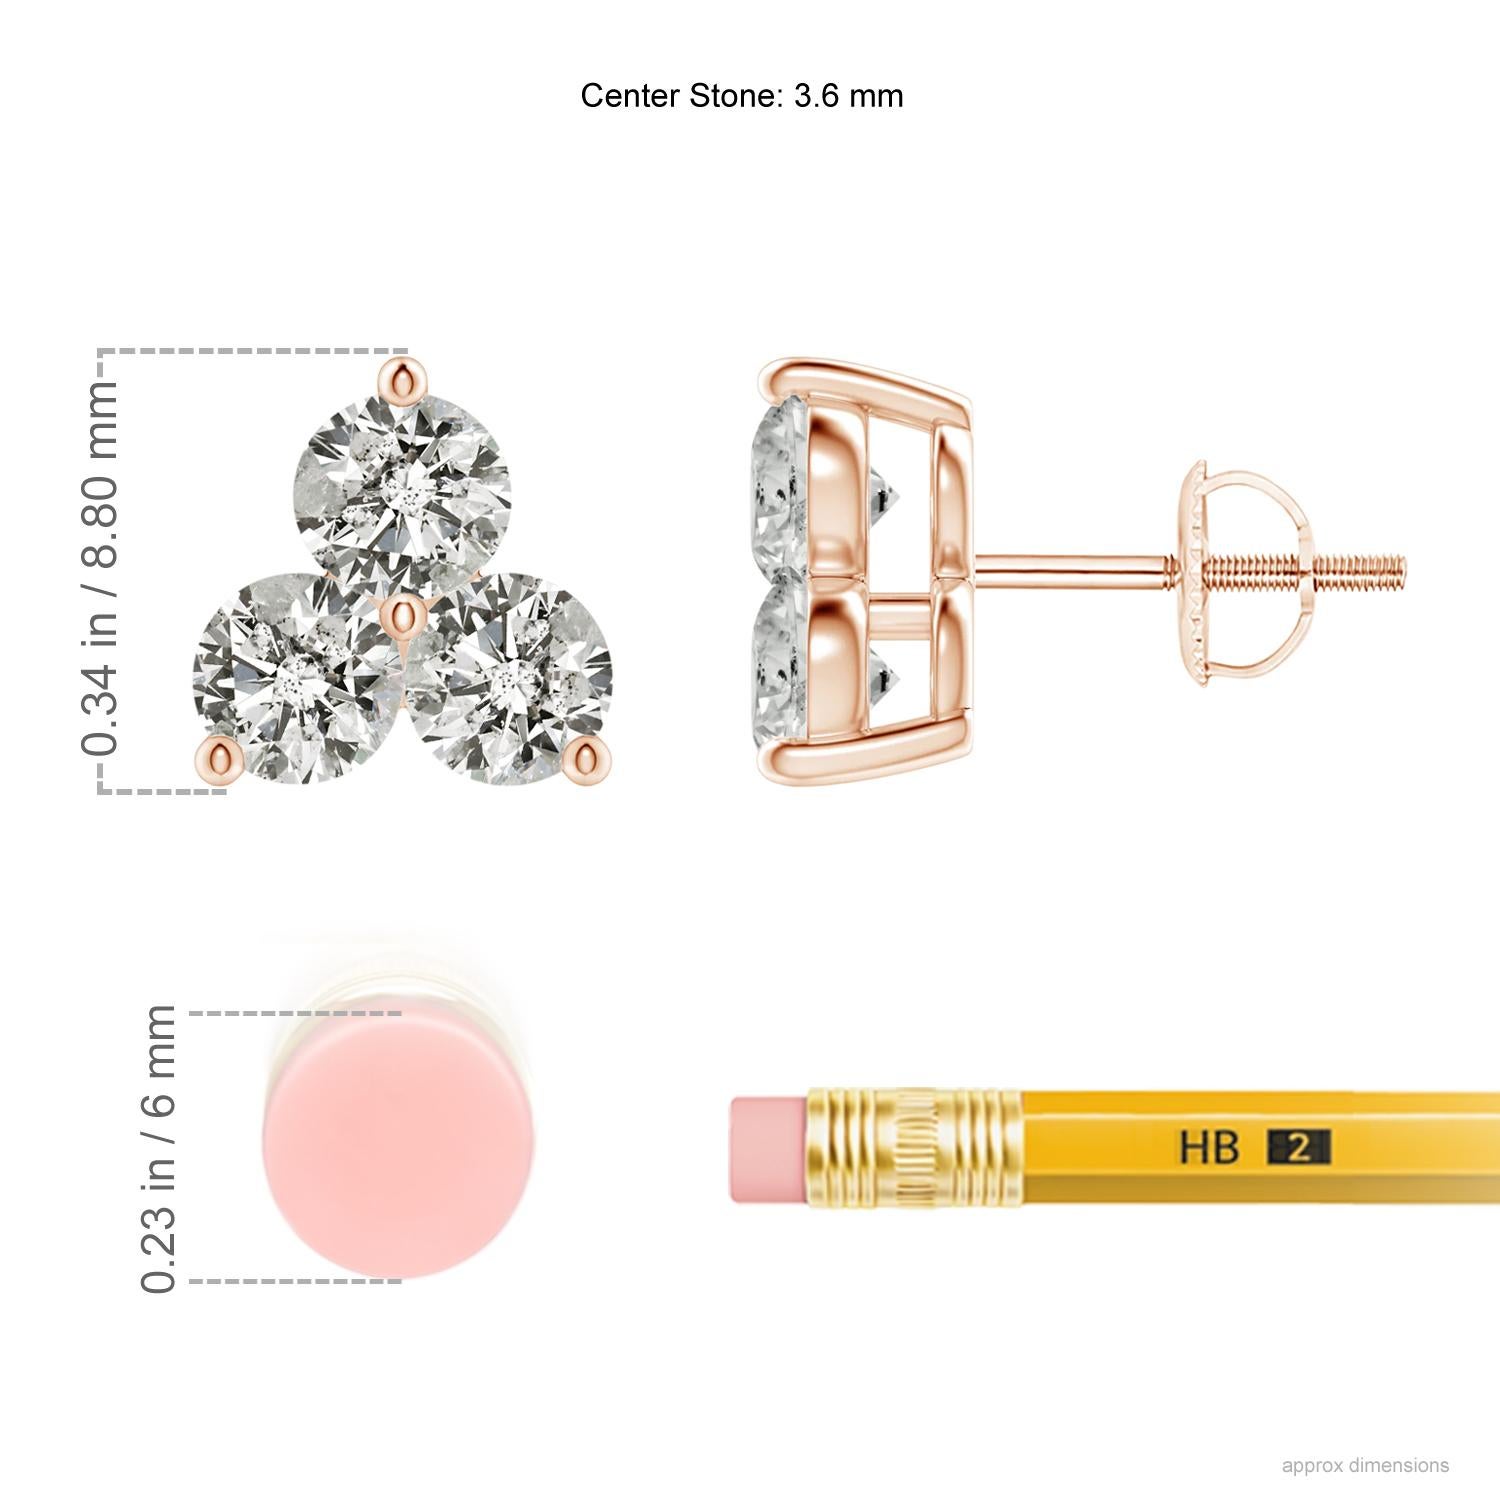 Trios of sparkling round diamonds are held in a shared prong setting to look like fascinating clusters on these stud earrings. Their glimmering white allure will enchant you and accentuate your look in a beautiful way. Crafted in 14K rose gold,